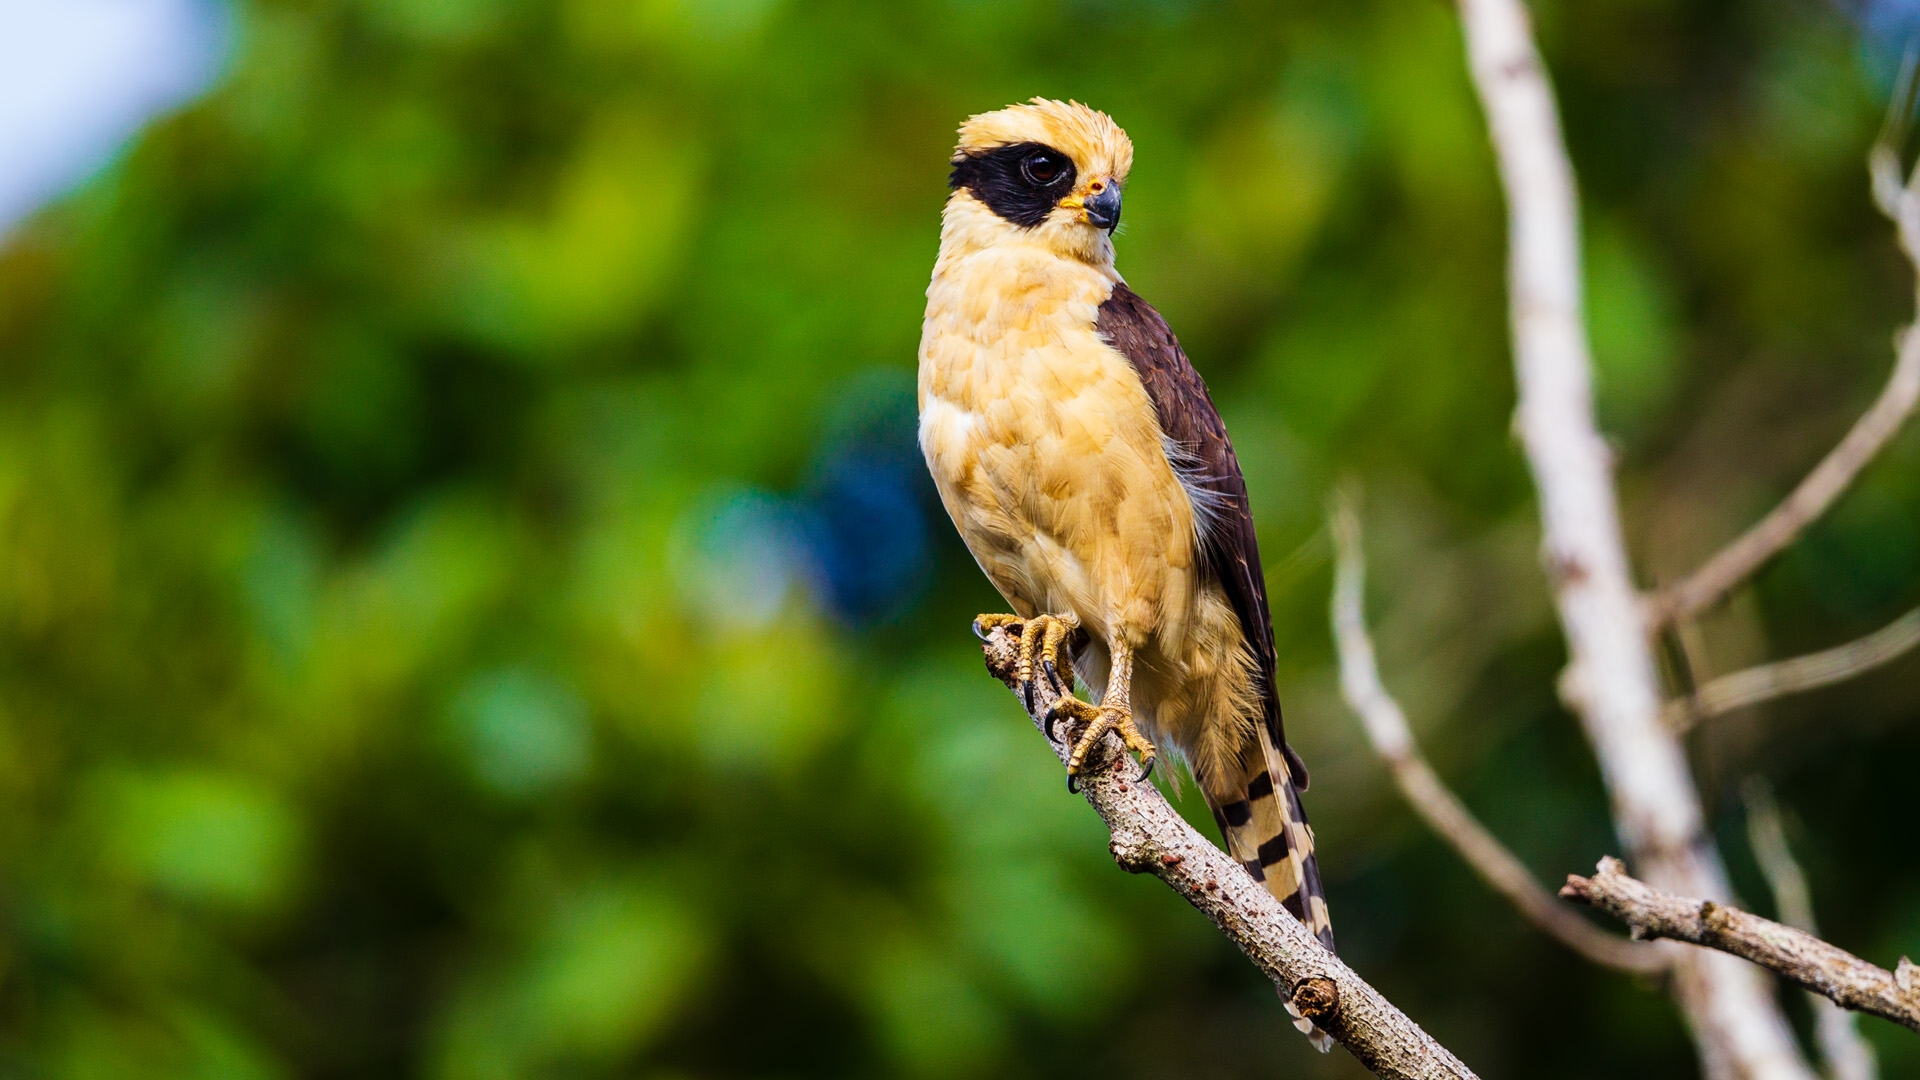 Laughing Falcon (Herpetotheres cachinnans)